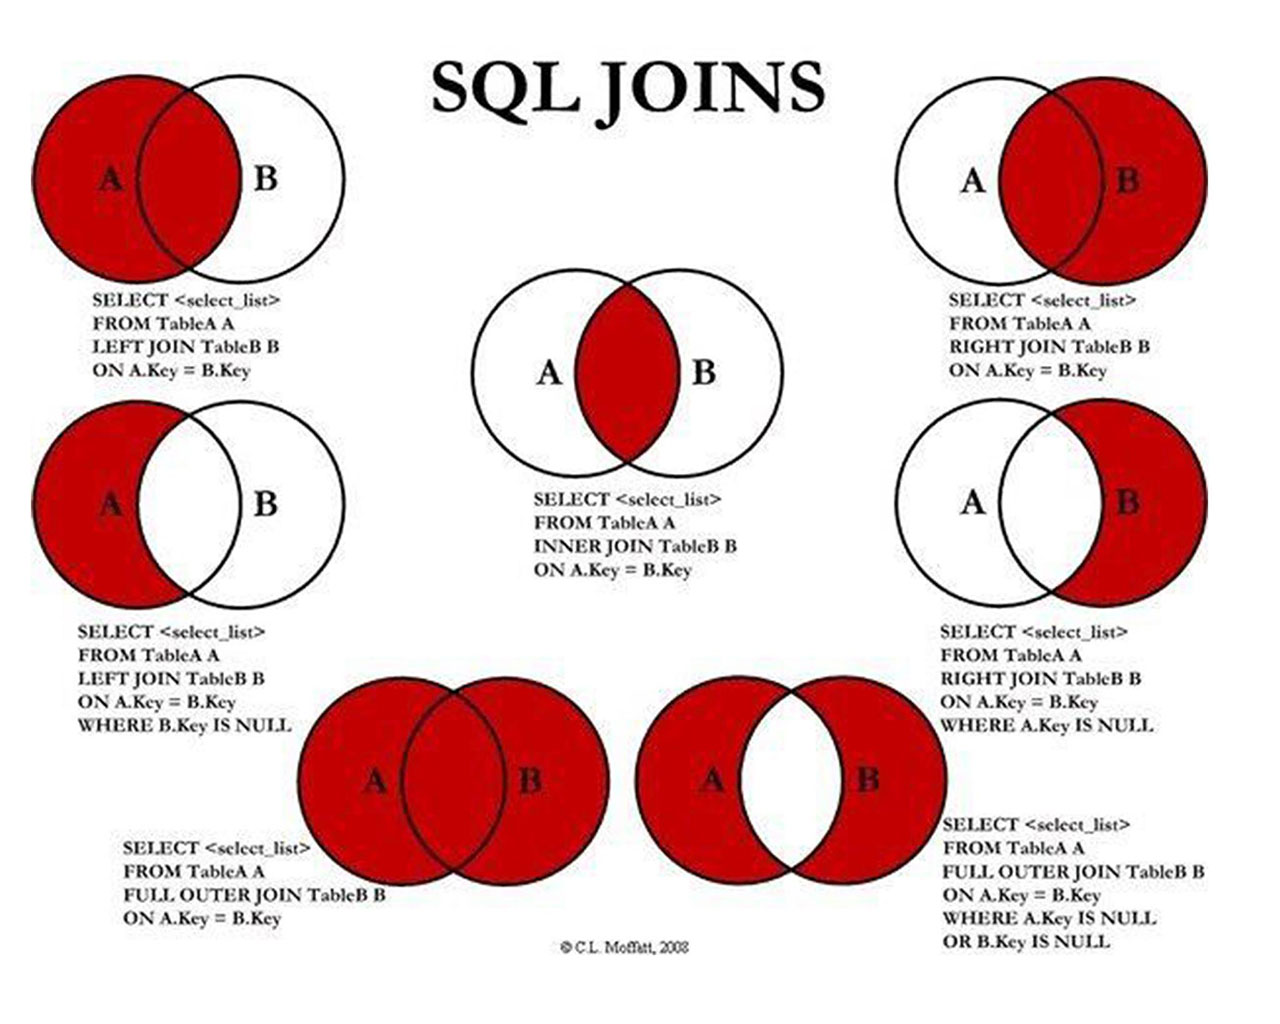 About SQL JOINS